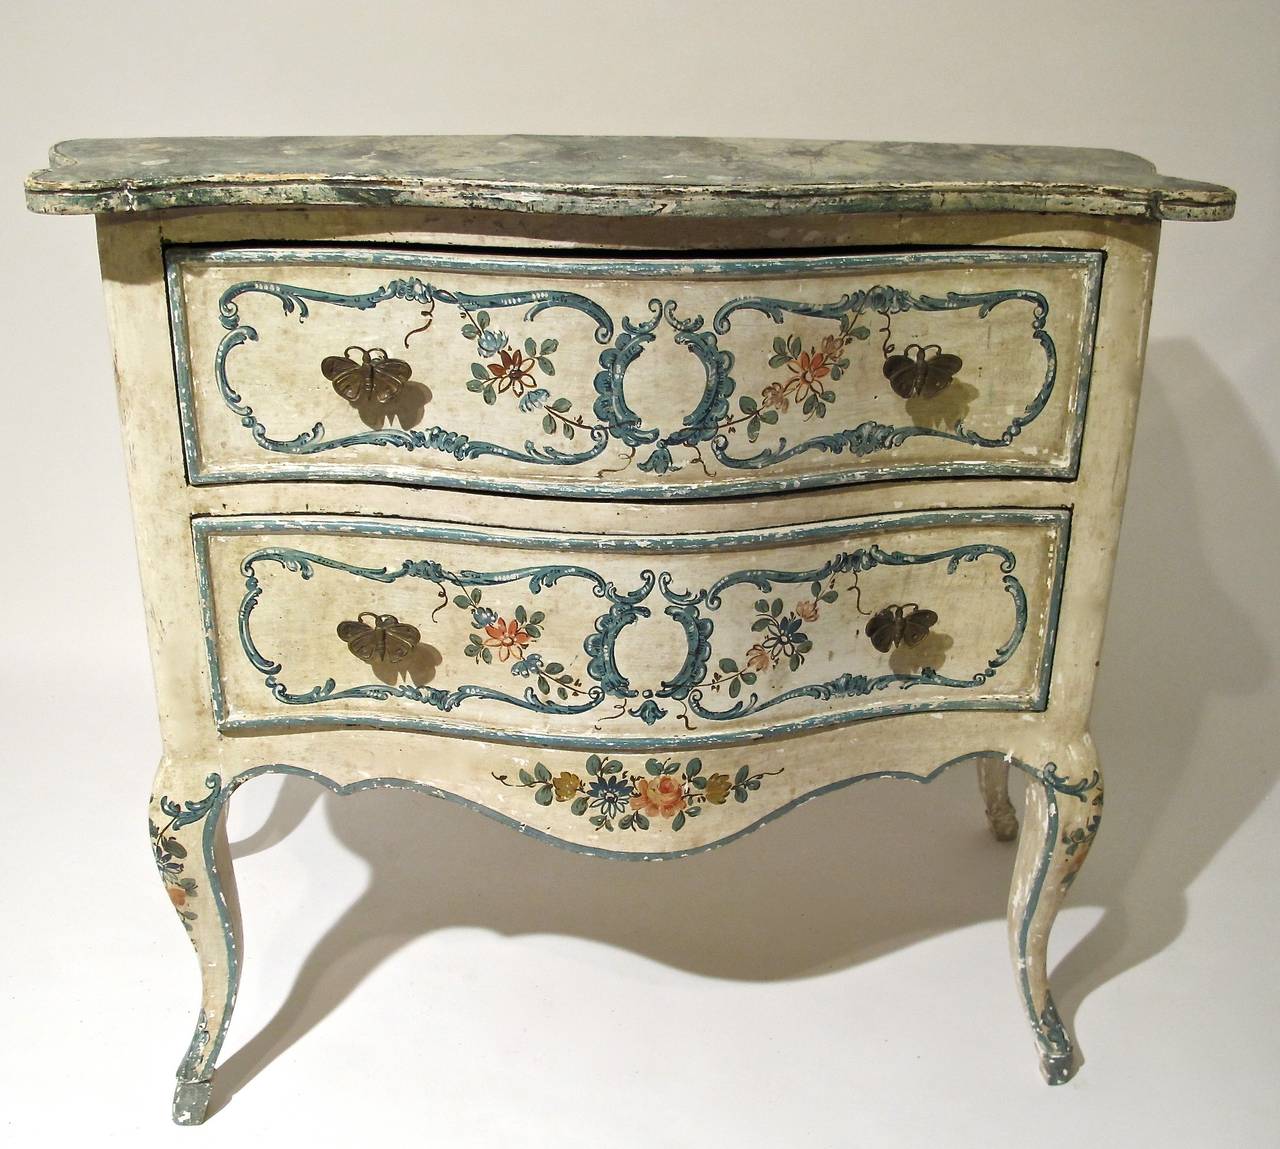 Charming and shapely Genoese painted commode. Shaped greenish blue and black faux marble top above white painted two-drawer commode. Blue C scroll panels painted on the drawer fronts with vining pink and blue flowers and brass butterfly pulls. The